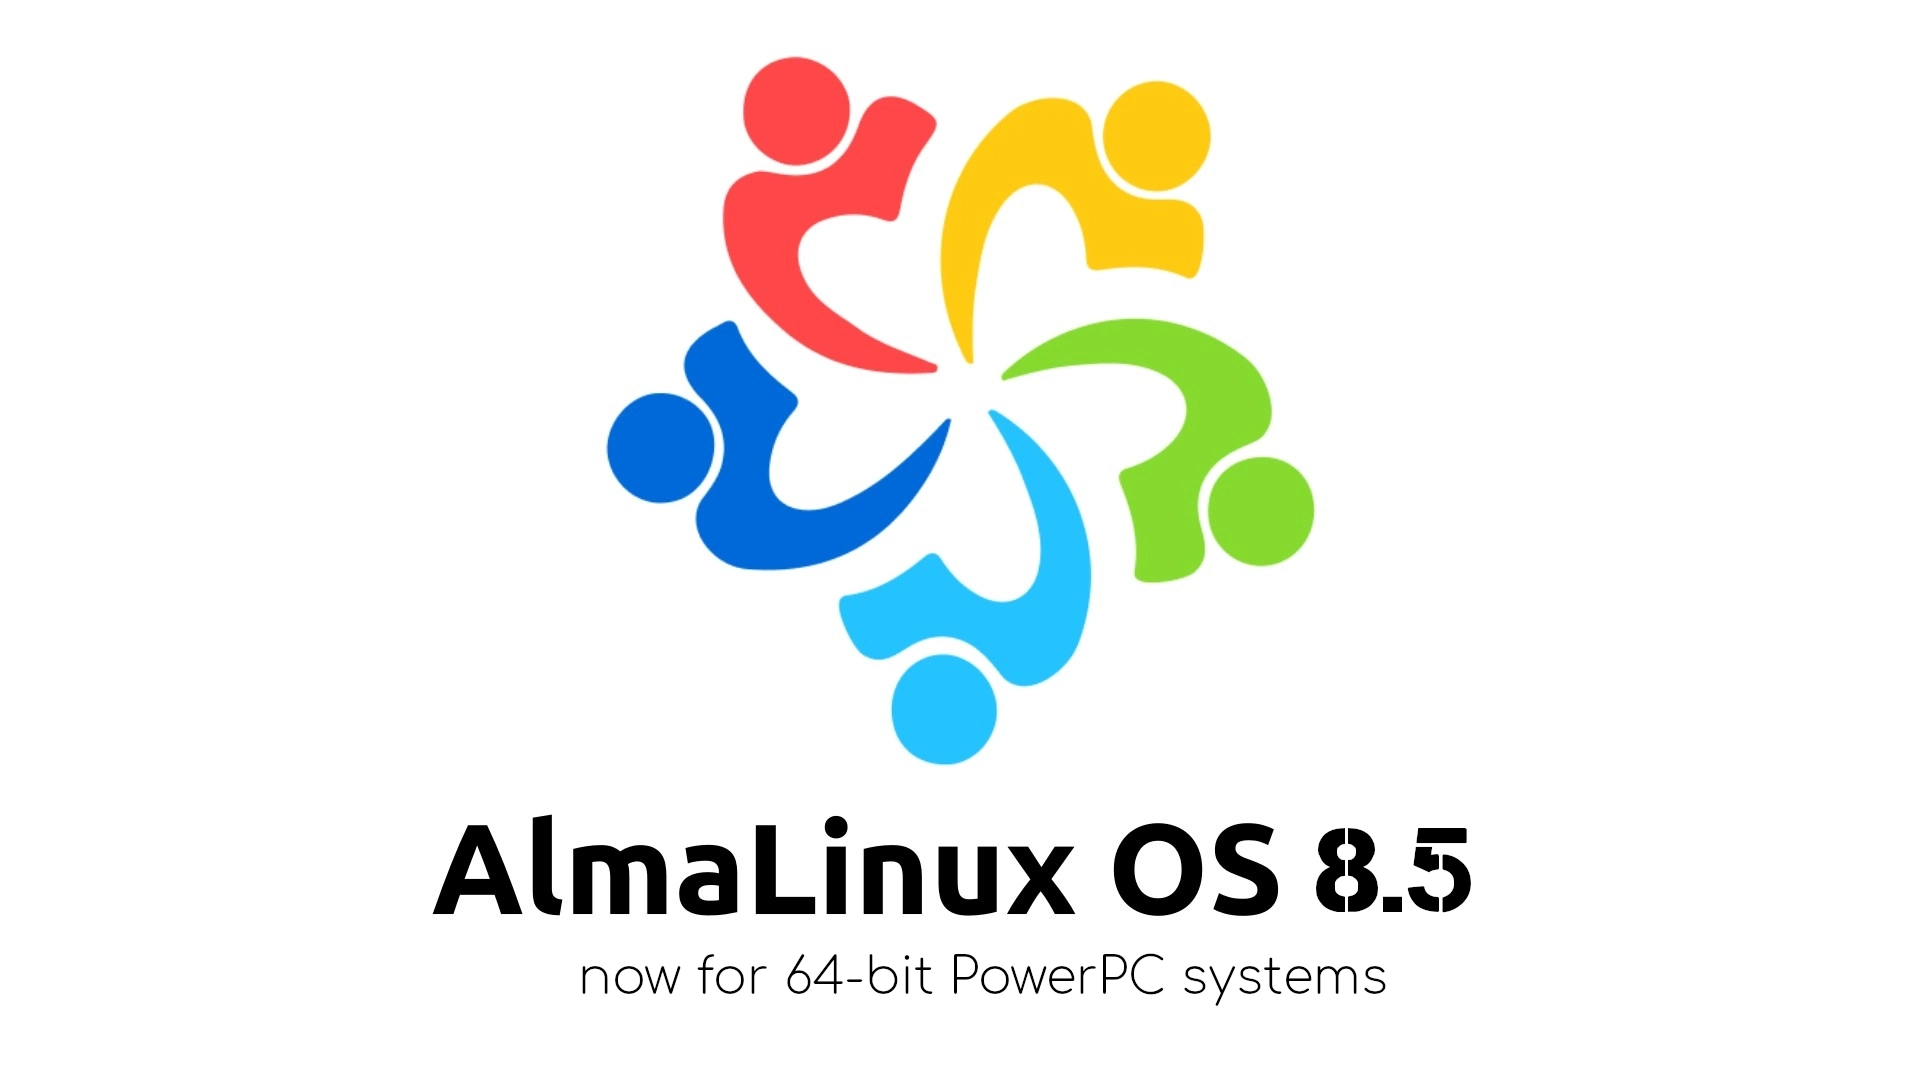 CentOS Alternative AlmaLinux OS Is Now Available for 64-Bit PowerPC Architecture